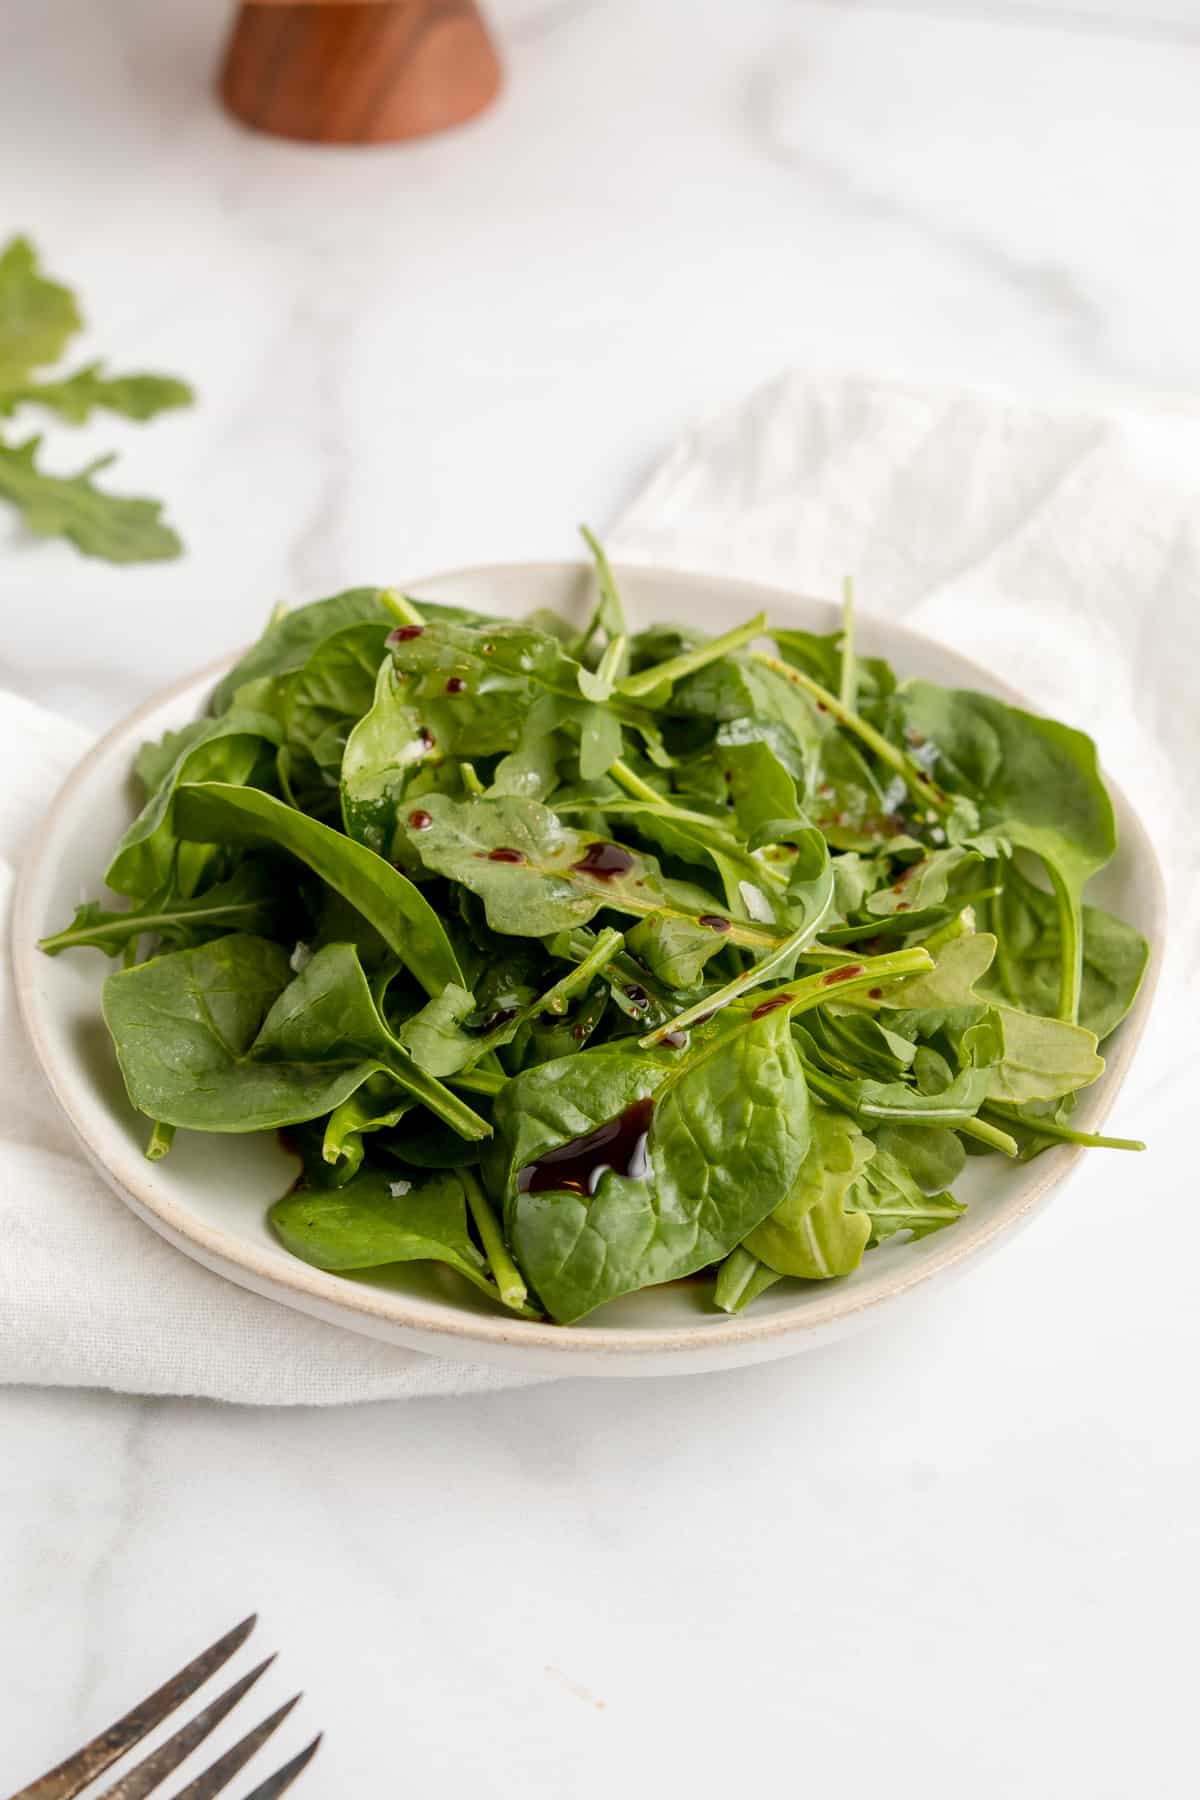 Spinach and arugula salad with balsamic vinaigrette on a white plate.